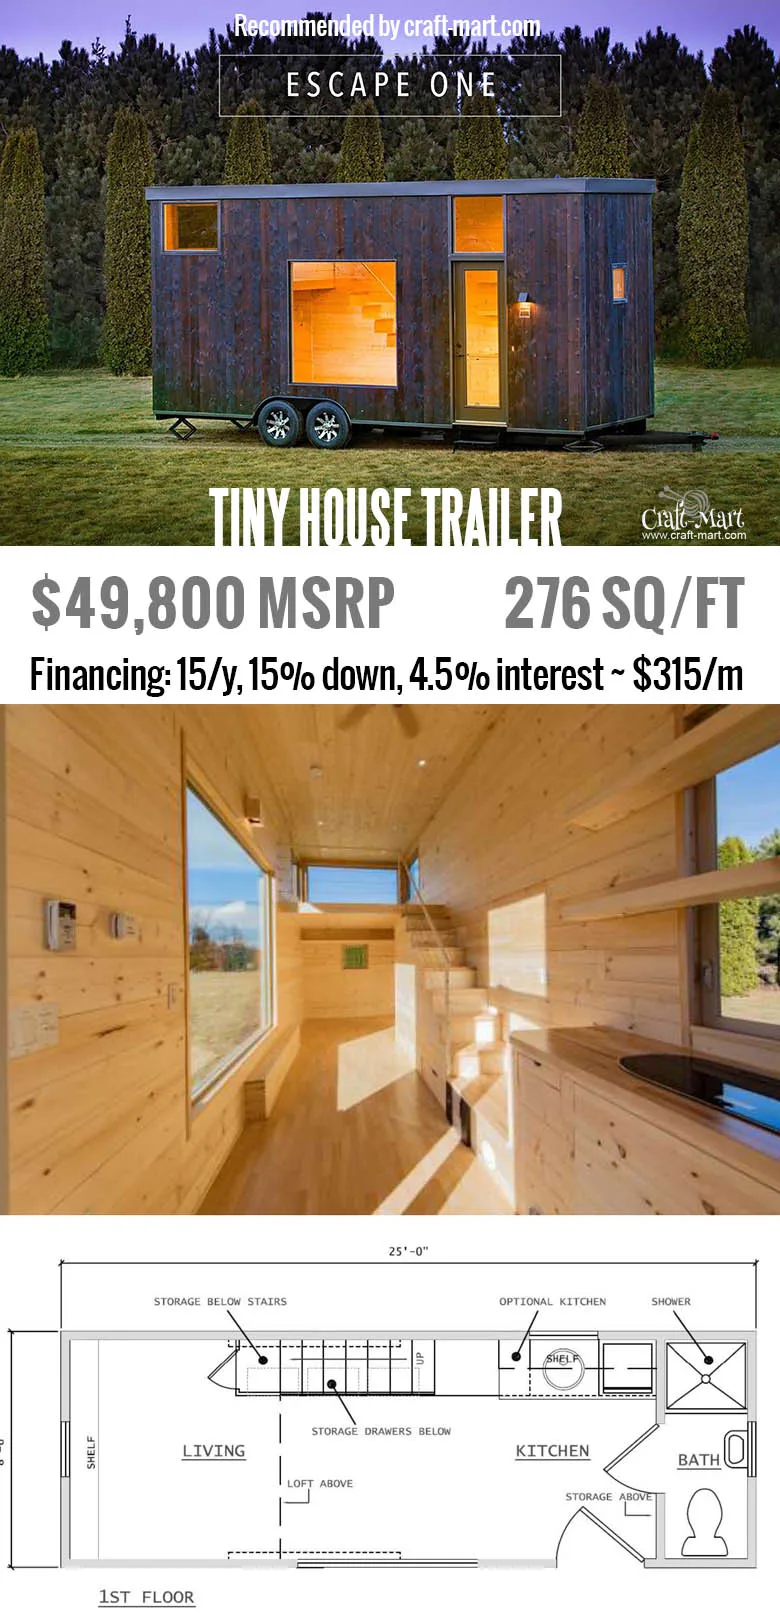 Escape One tiny house on wheels -  interior and floorplan